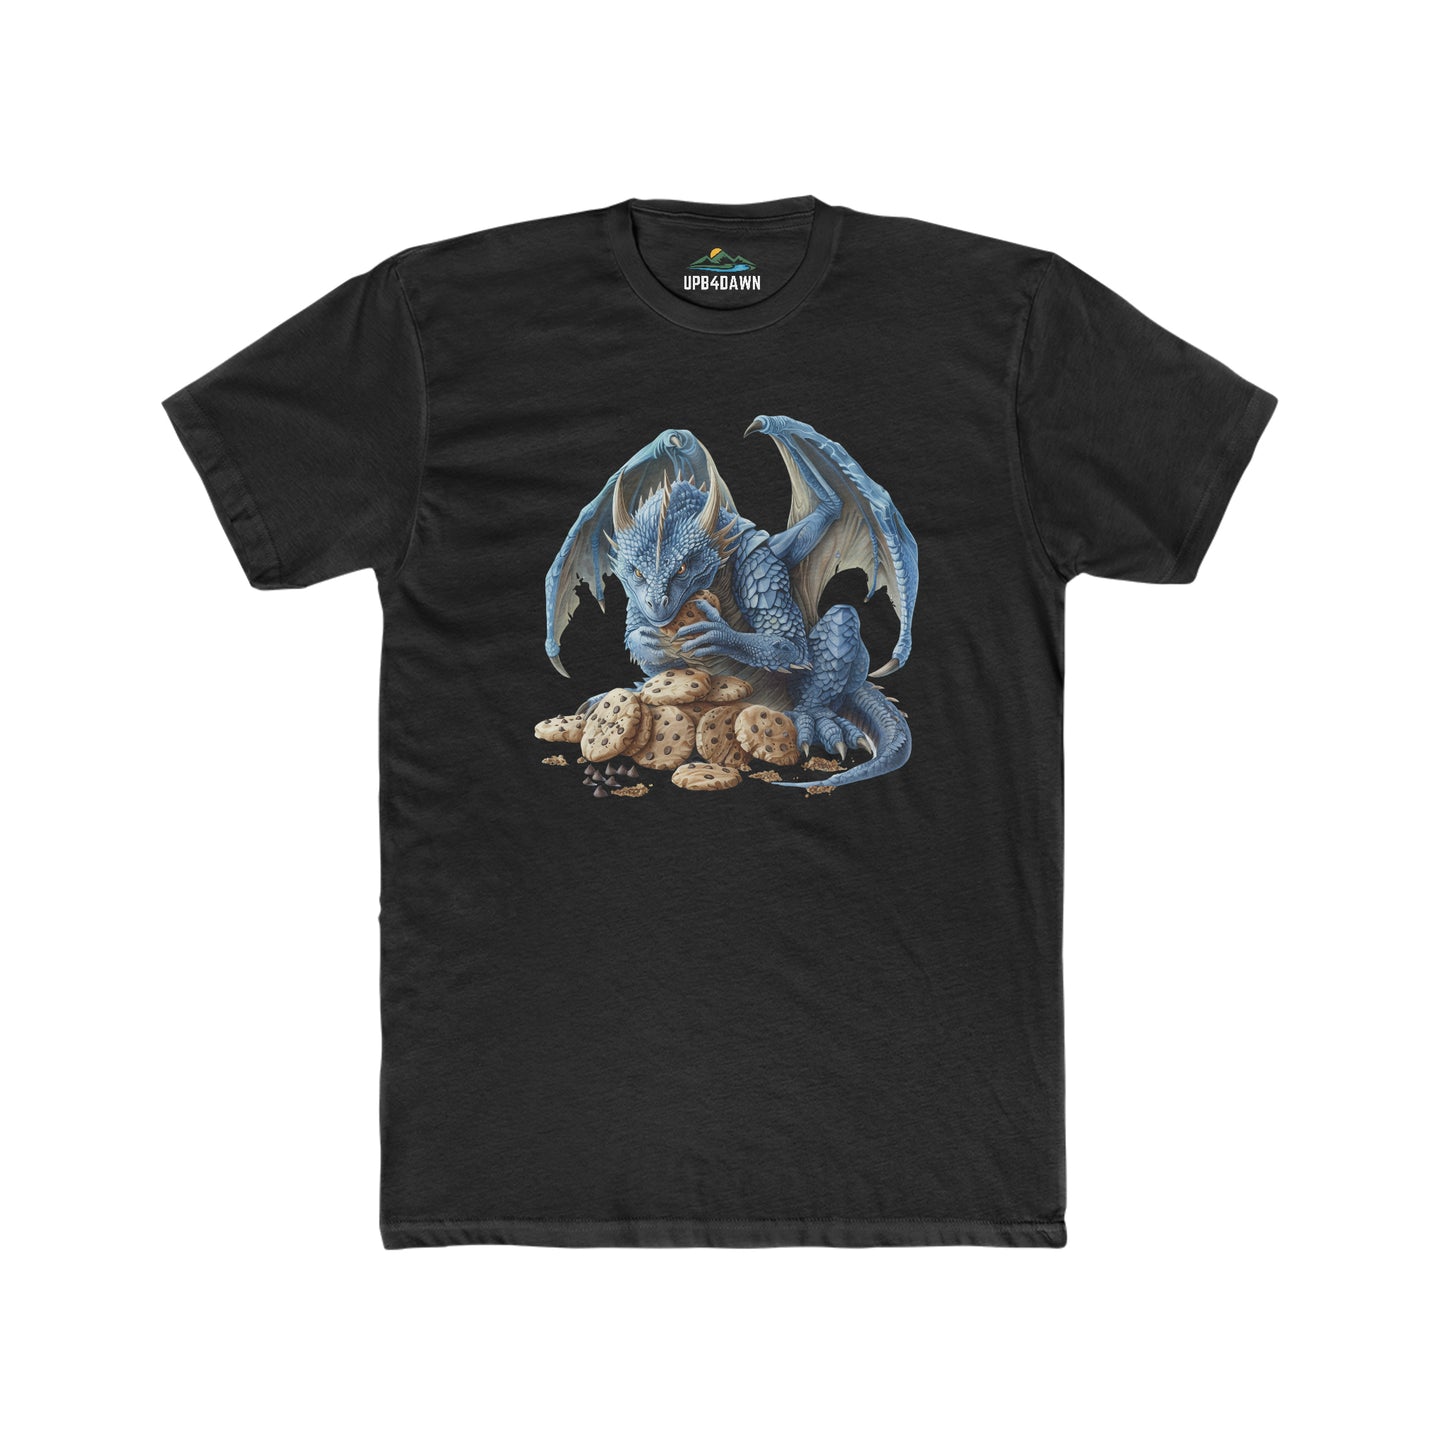 A Men's Cotton Crew Tee - Blue Dragon 2 showcasing a detailed high quality print of a blue dragon curled around a clutch of eggs, positioned in the center against a plain background.